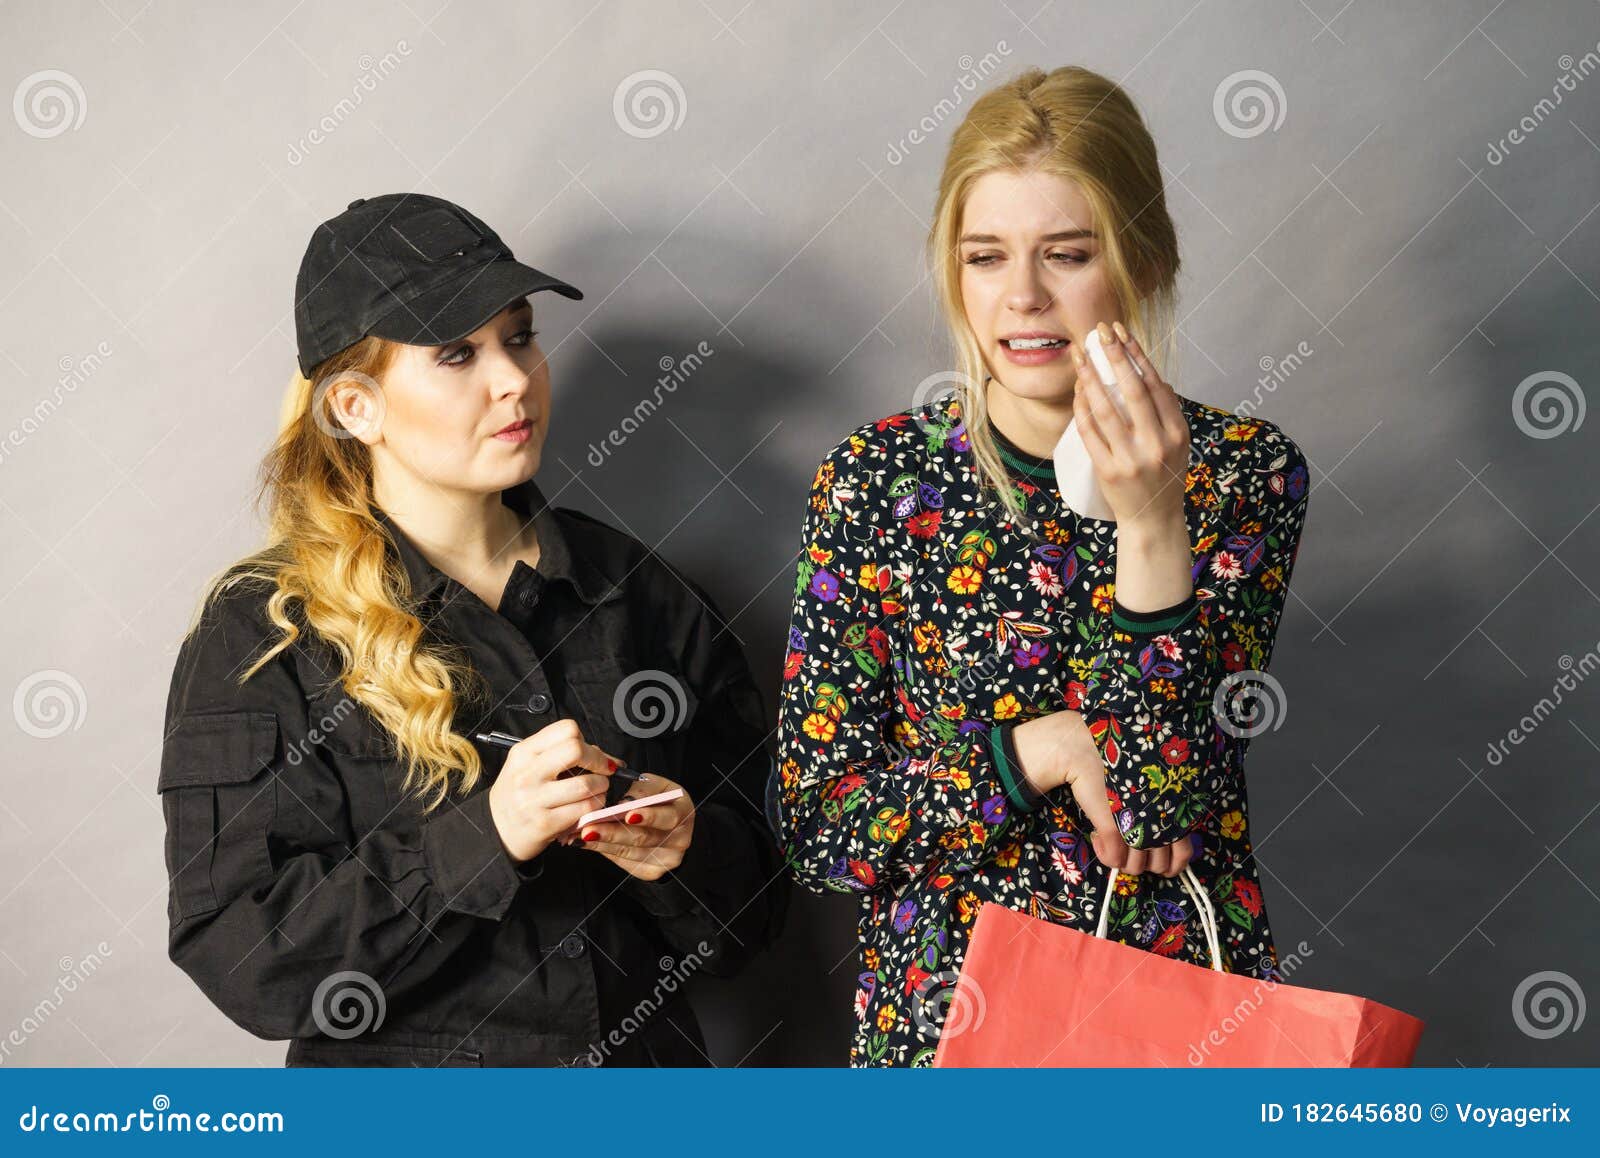 Security Guard And Shoplifter Stock Photo Image Of Steal Teen 182645